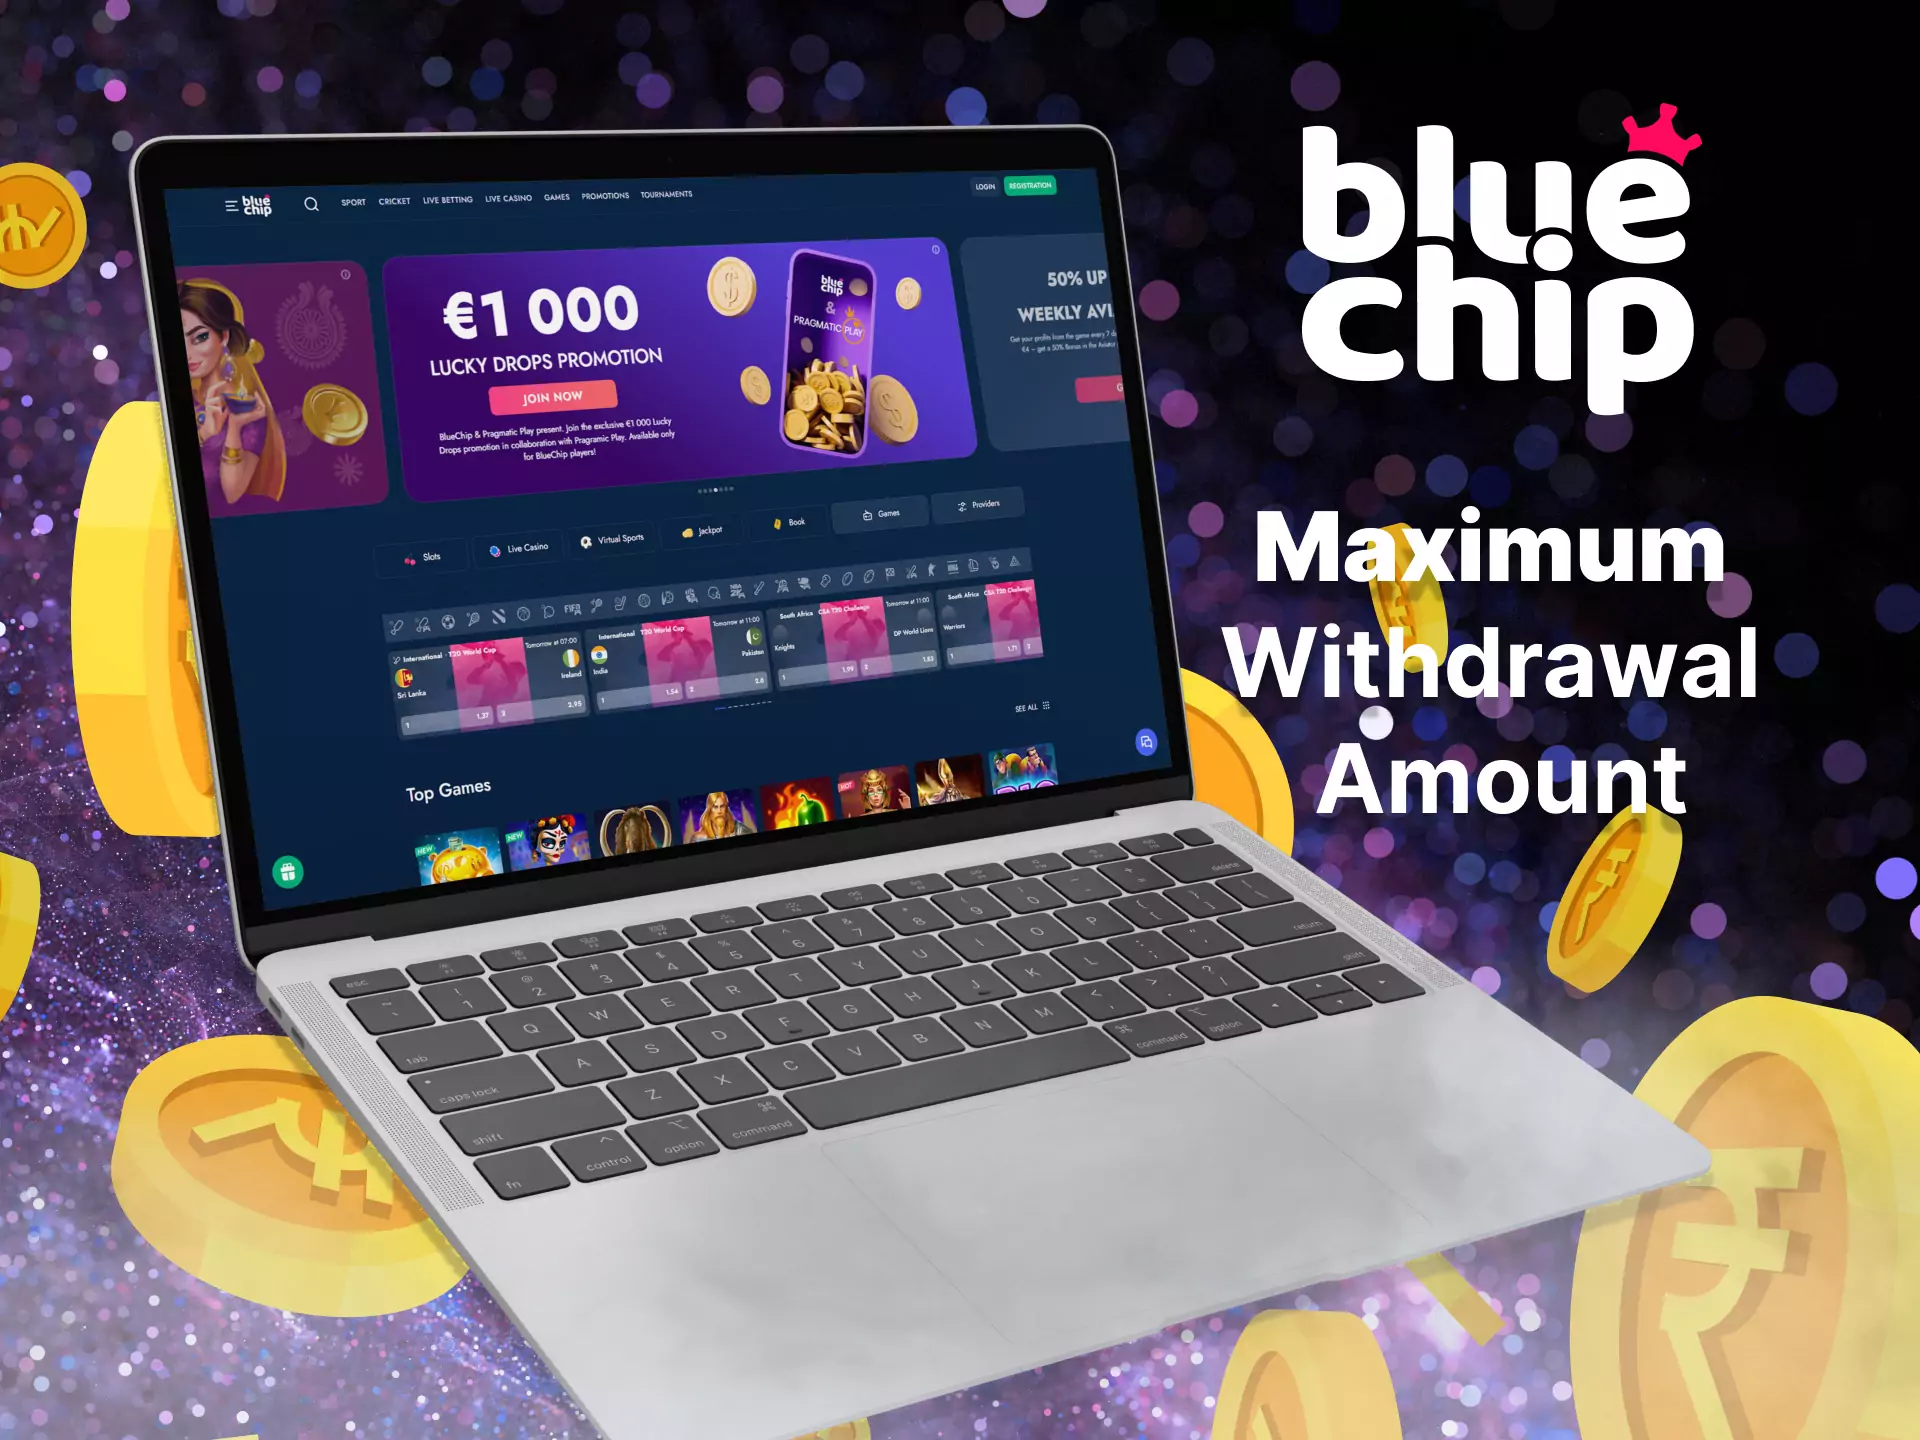 Find out the maximum withdrawal limit of Bluechip funds.